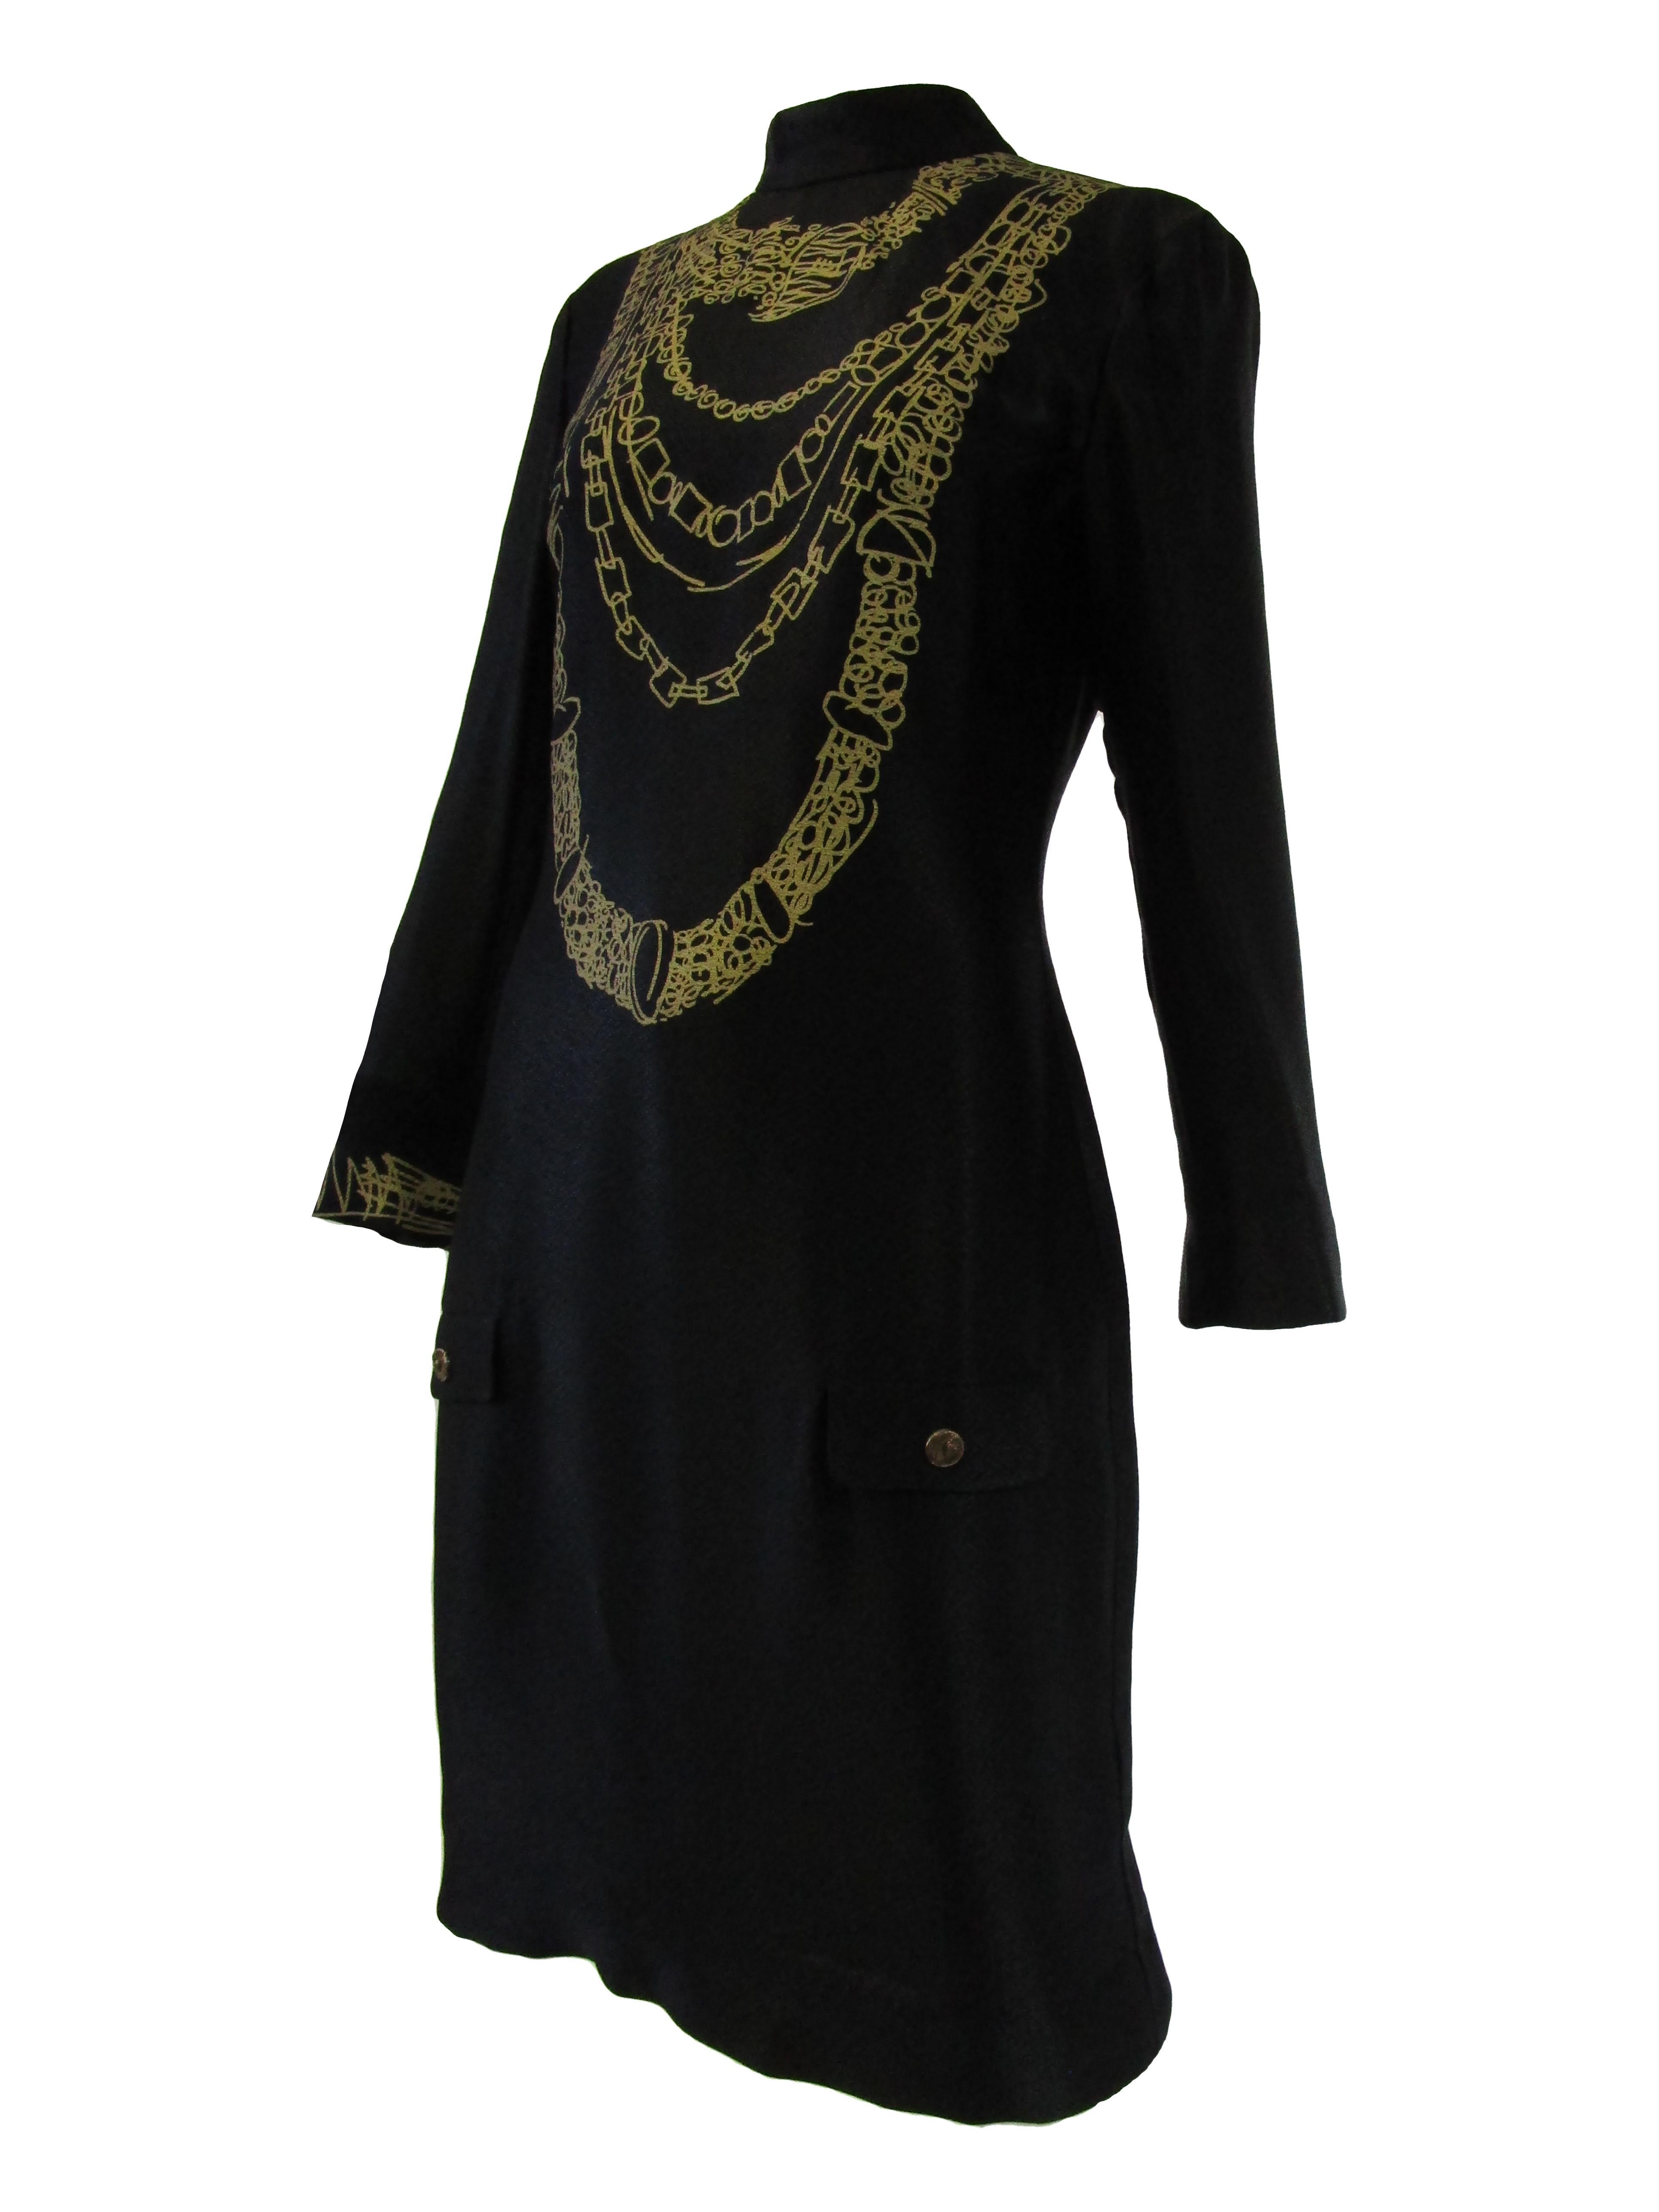  1990s Zandra Rhodes Black Silk Evening Dress With Gold Chain Print In Excellent Condition For Sale In Houston, TX